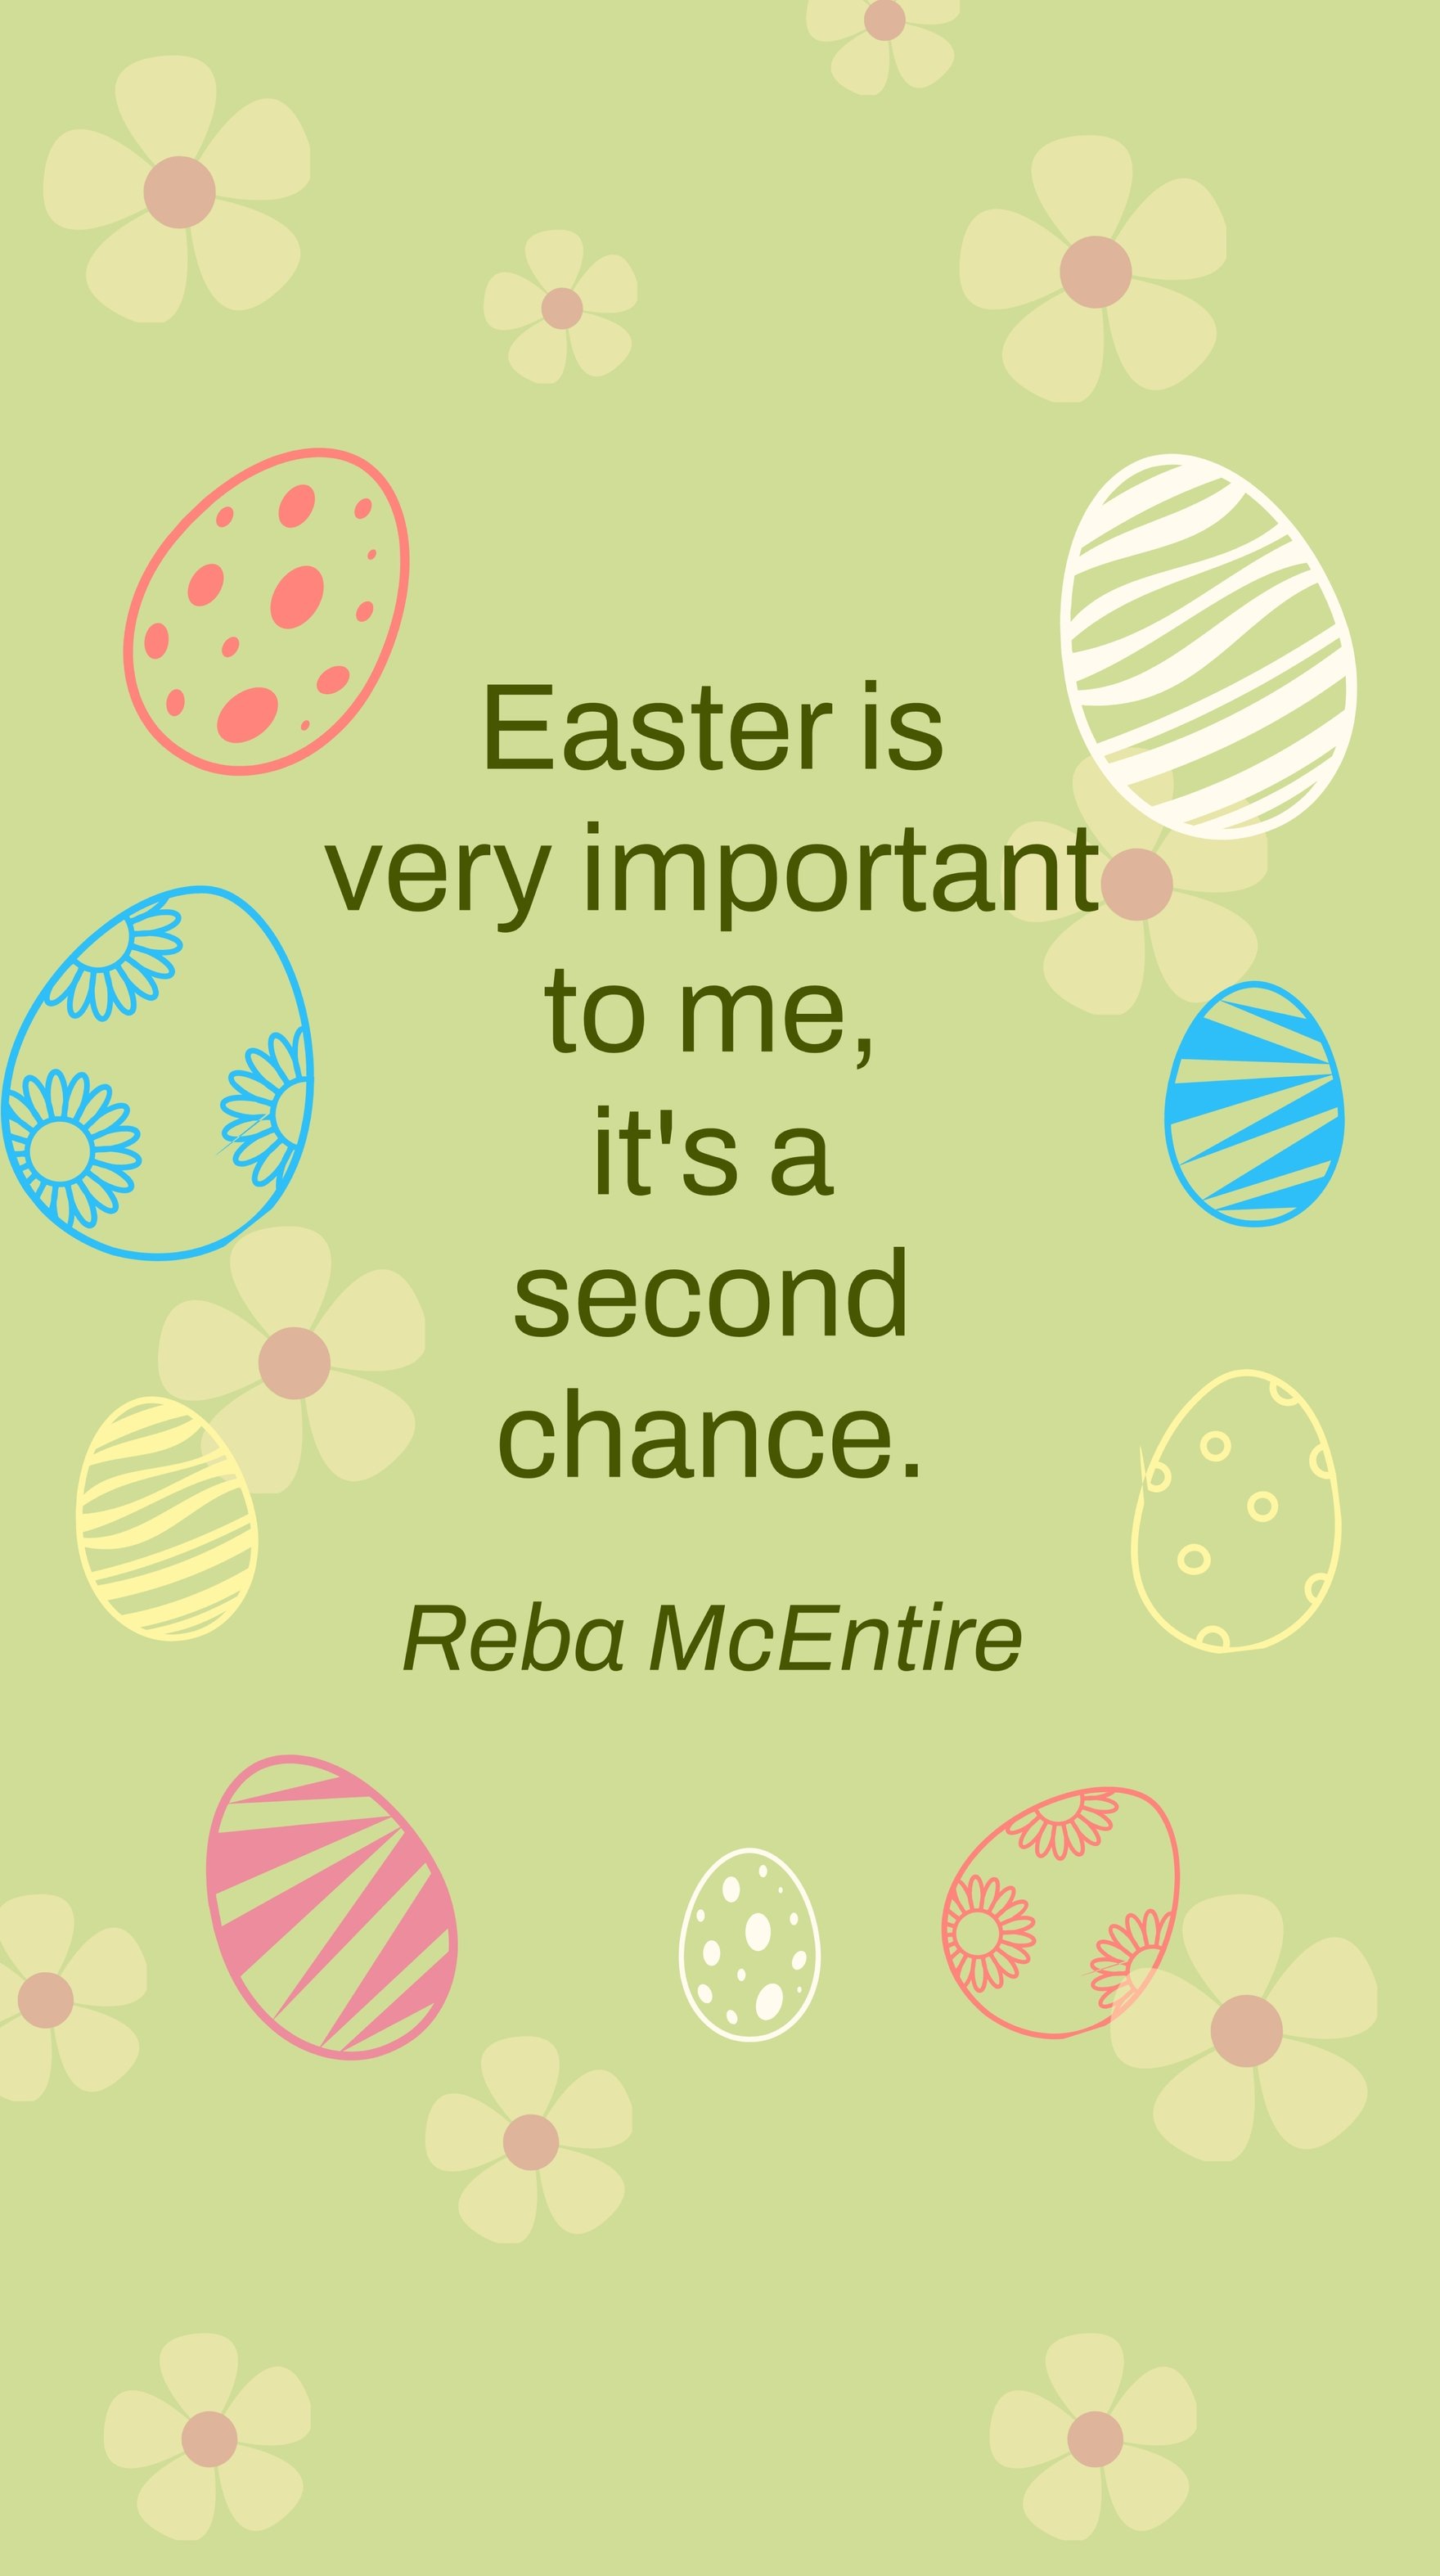 Reba McEntire - Easter is very important to me, it's a second chance.